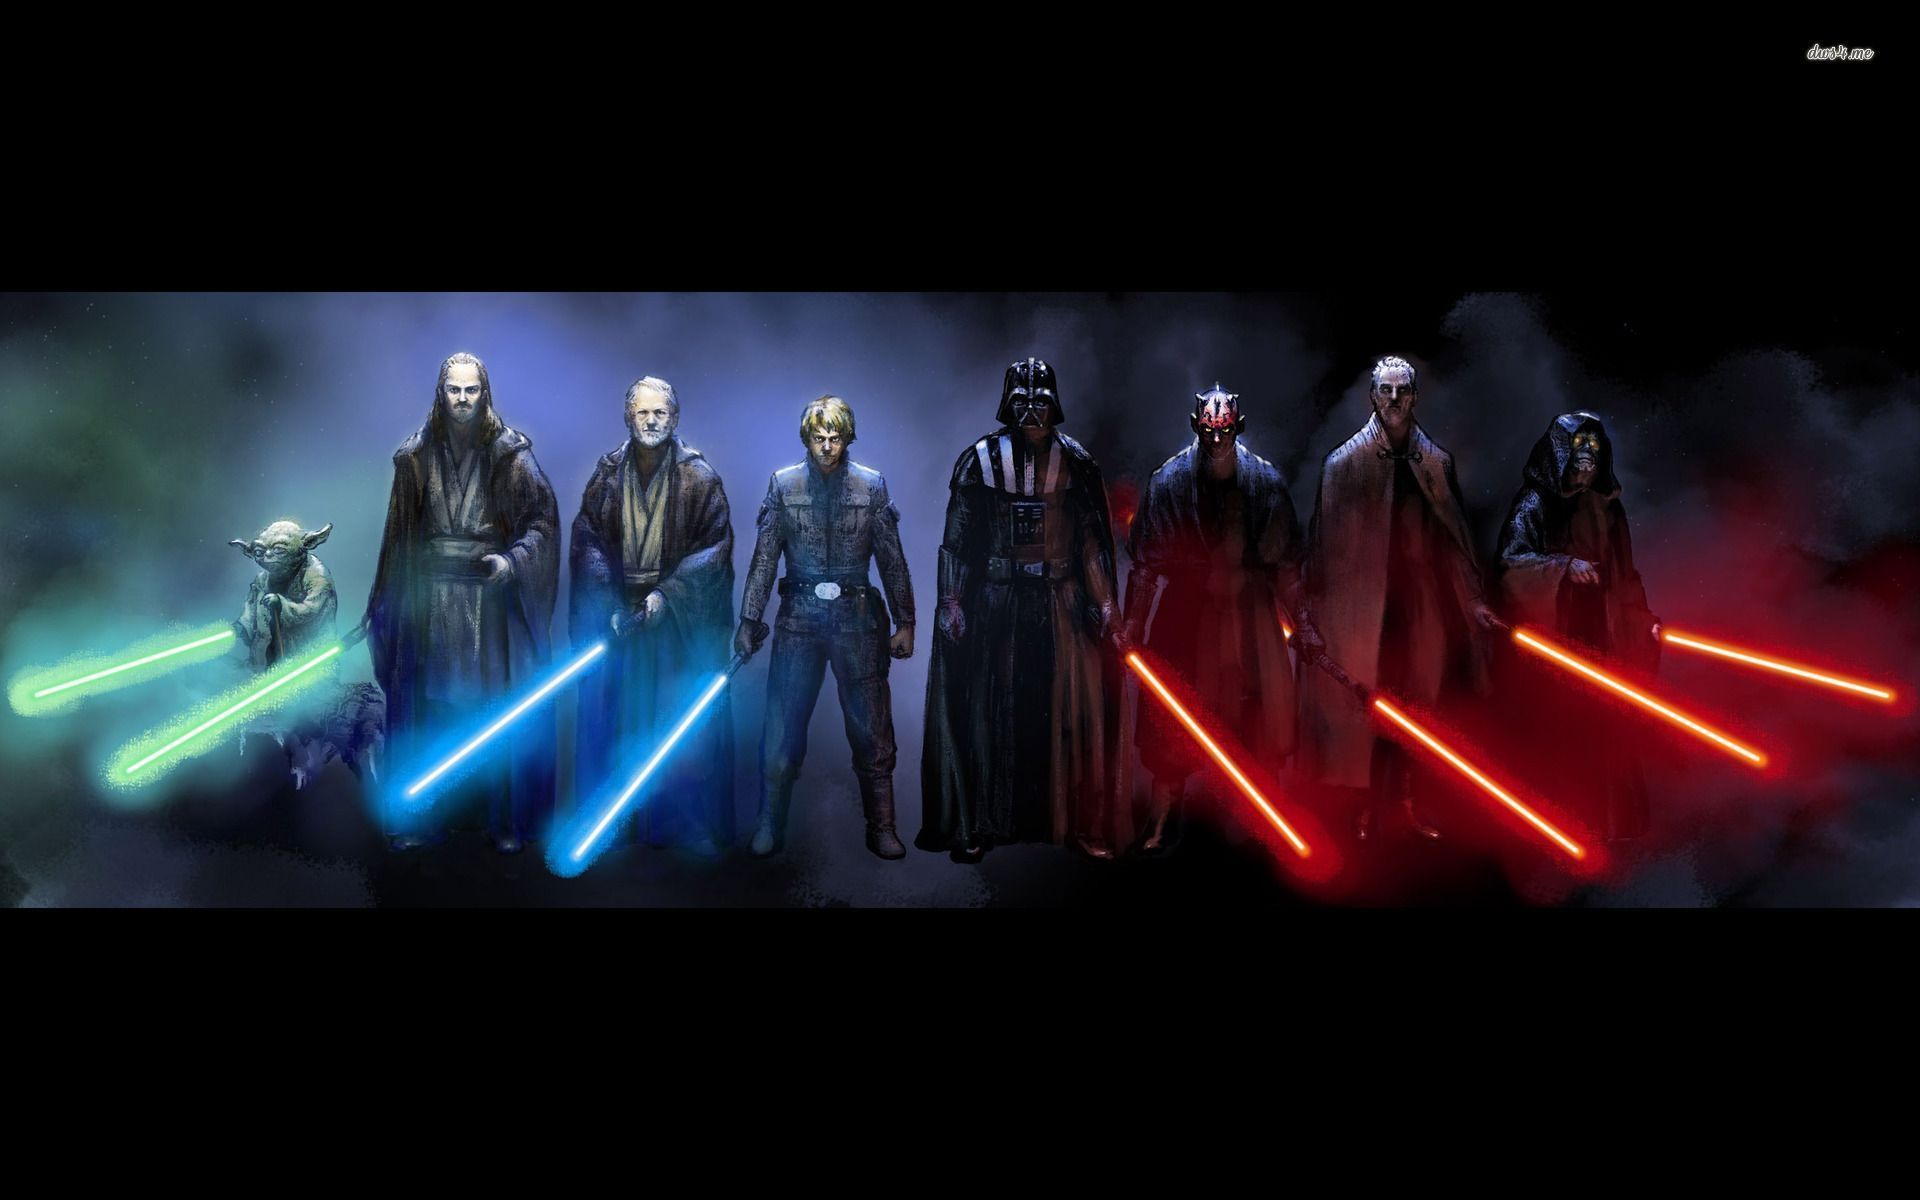 Jedi and Sith - Star Wars wallpaper - Movie wallpapers - #17310